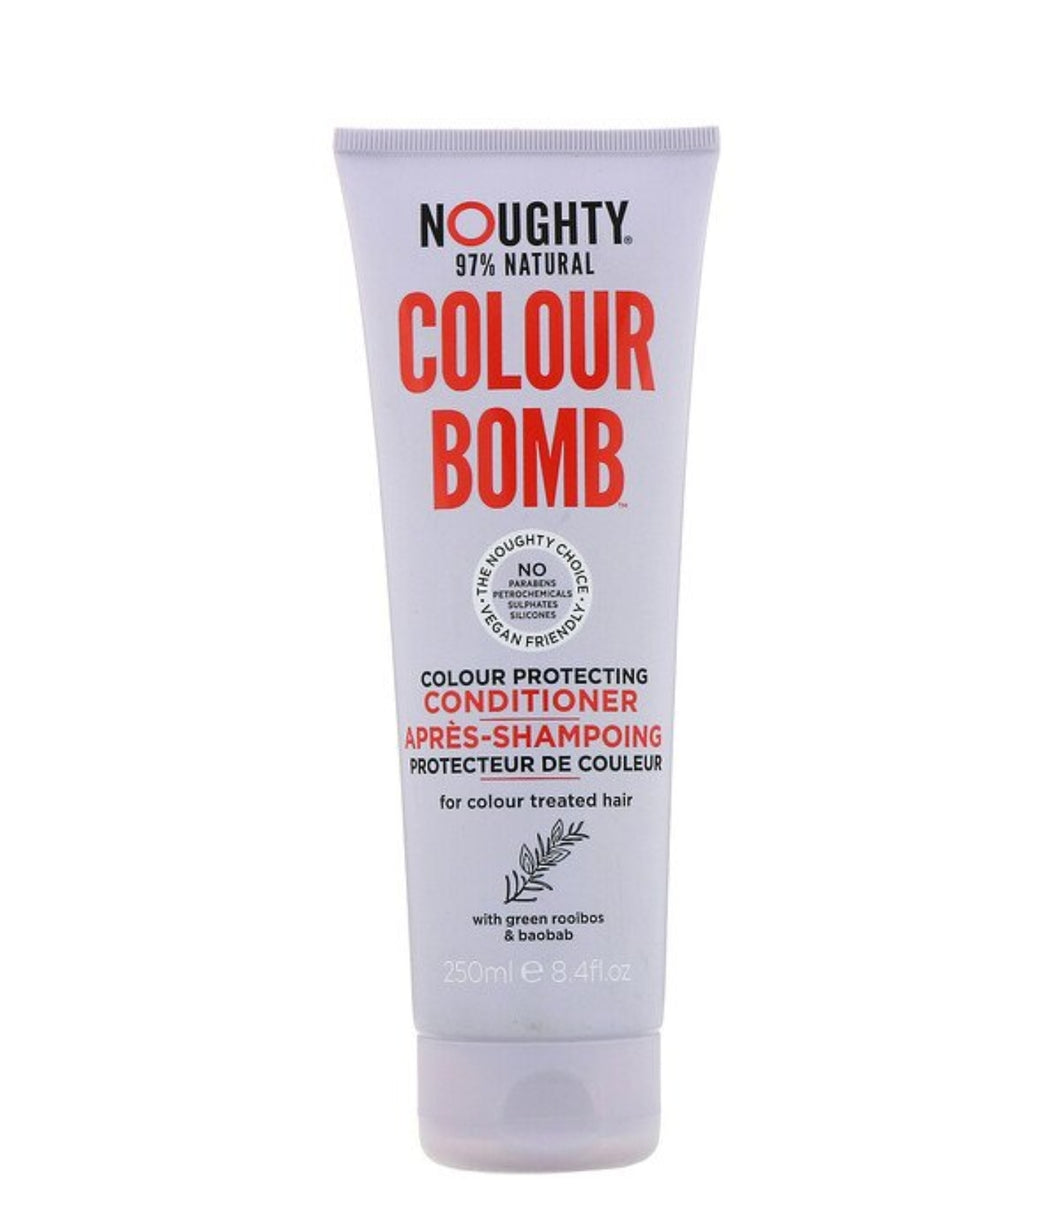 Noughty 97% Natural Color Protecting Conditioner